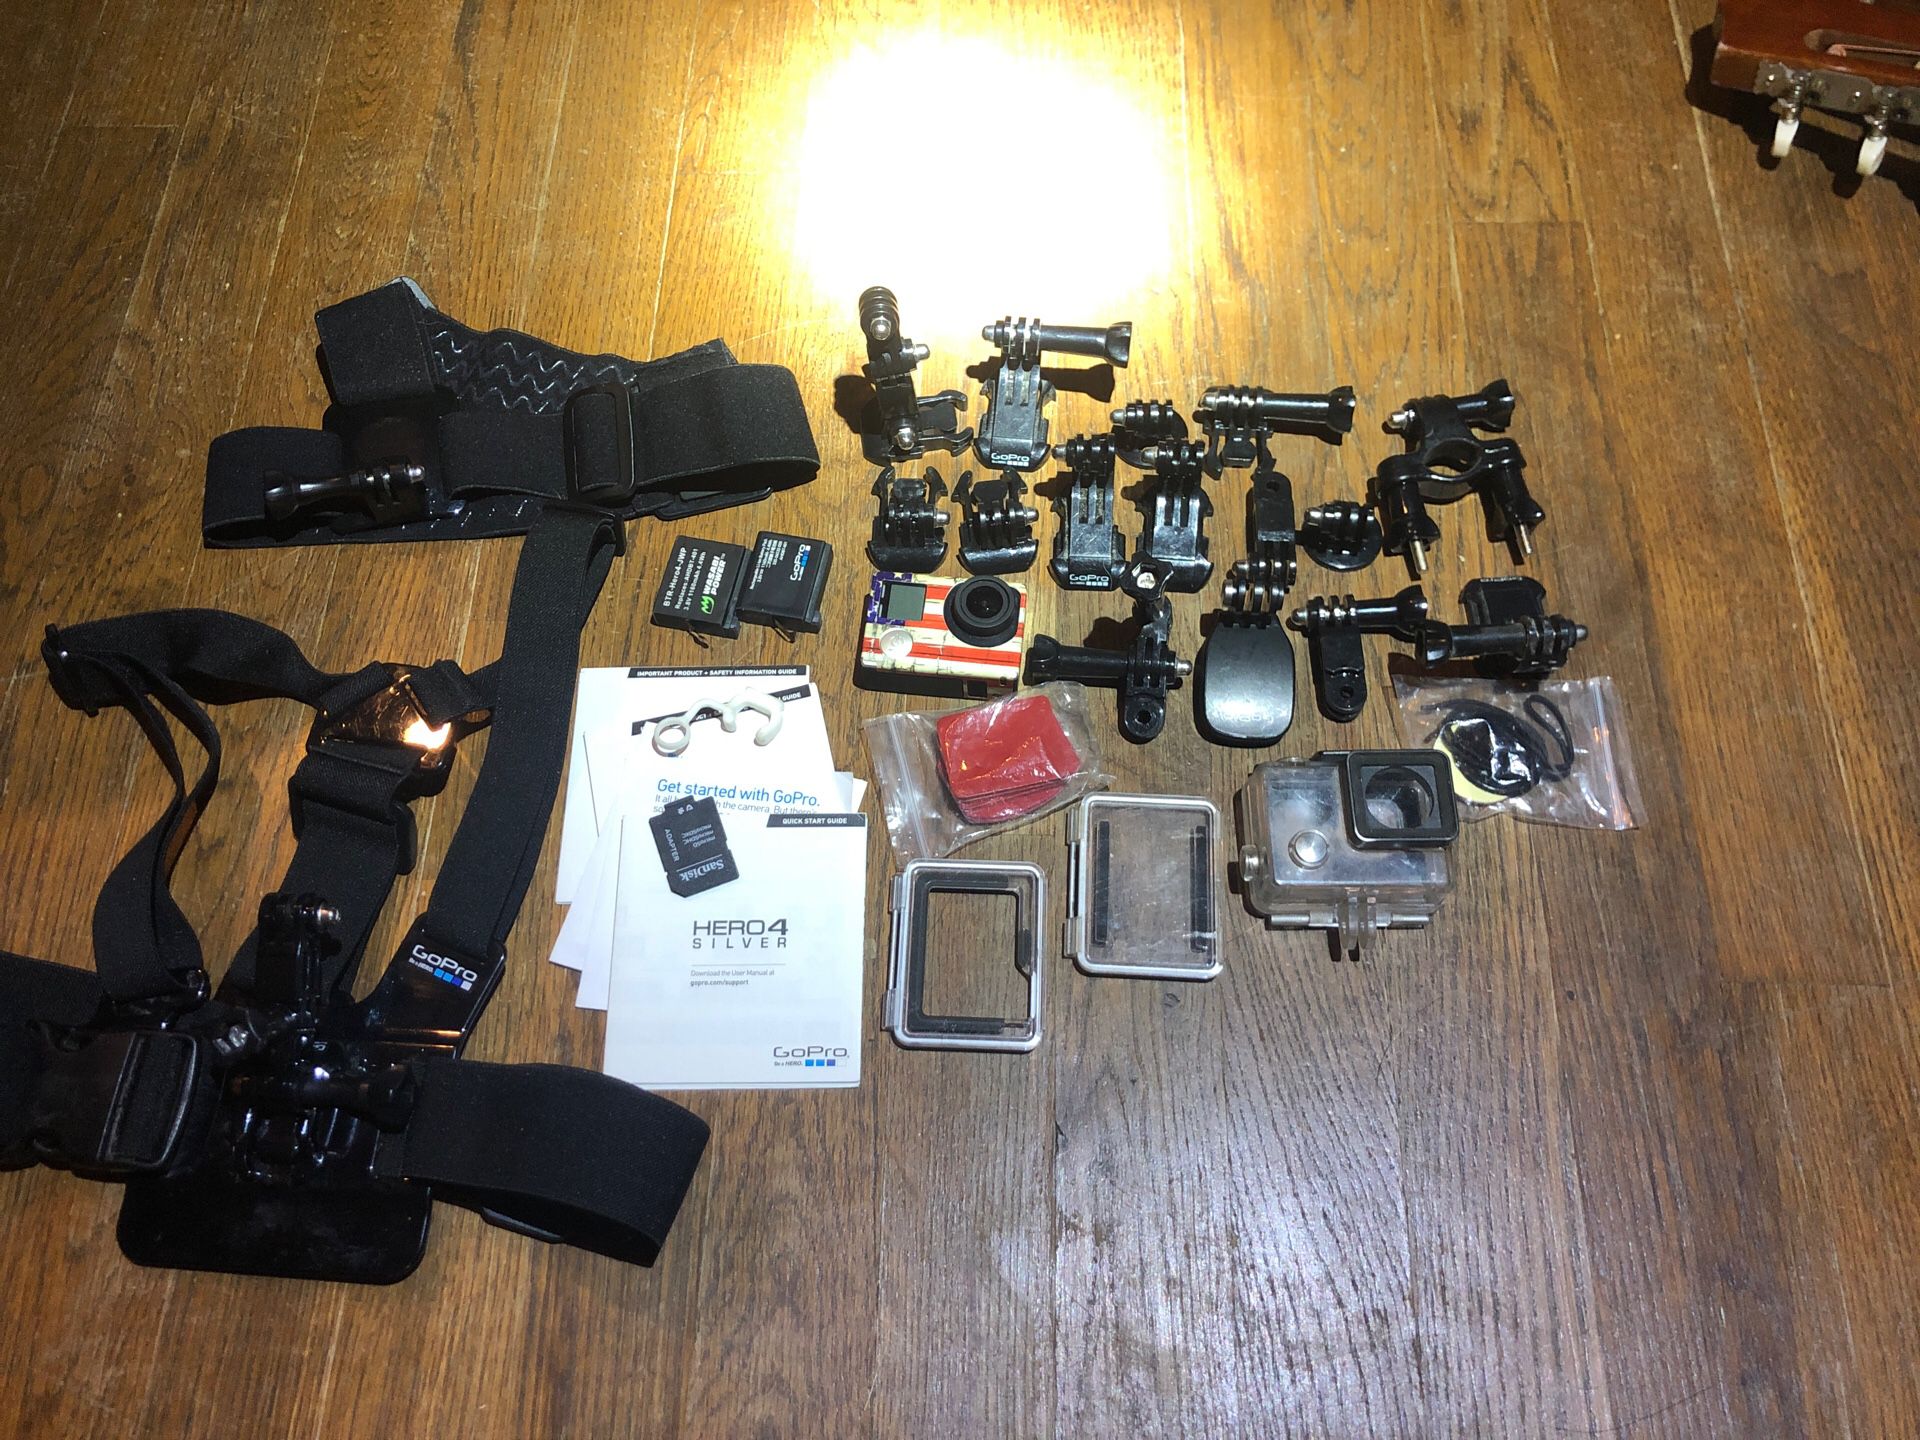 GoPro hero 4 silver with accessories